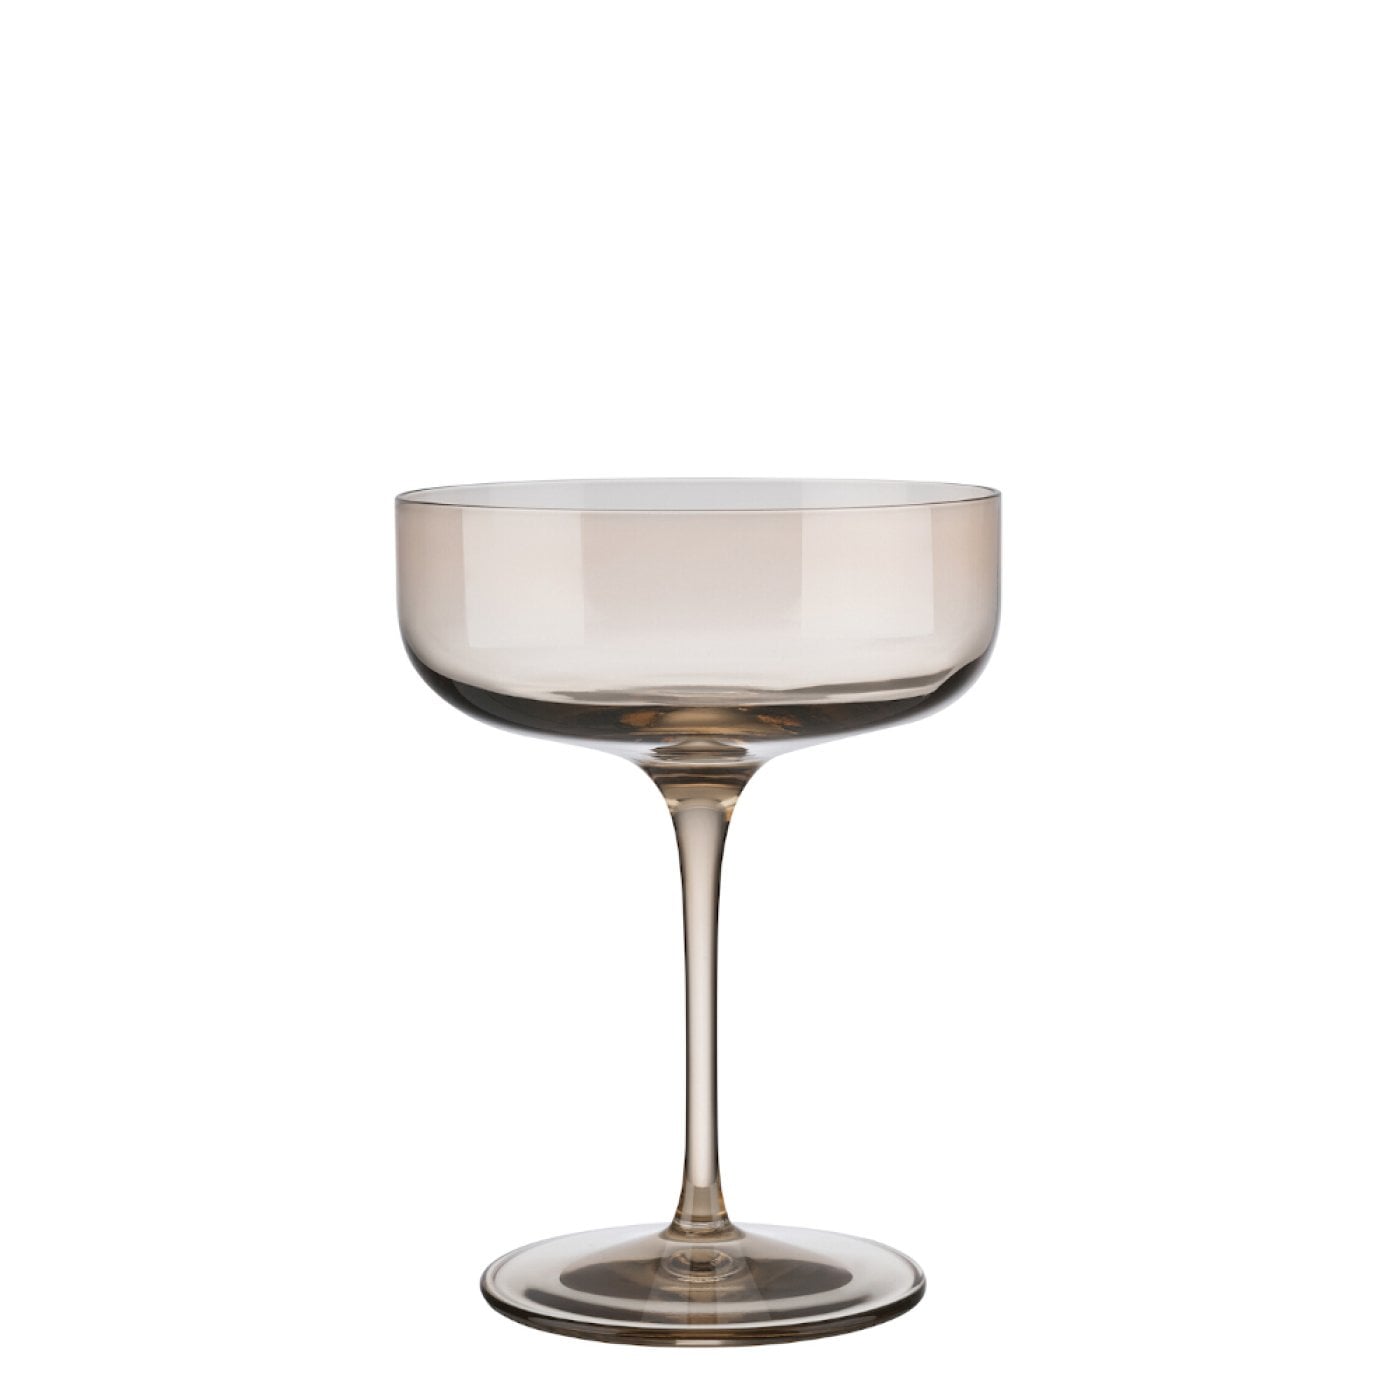 Blomus Champagne Coupe Glasses Tinted in Golden-Beige Nomad Fuum Set of 4